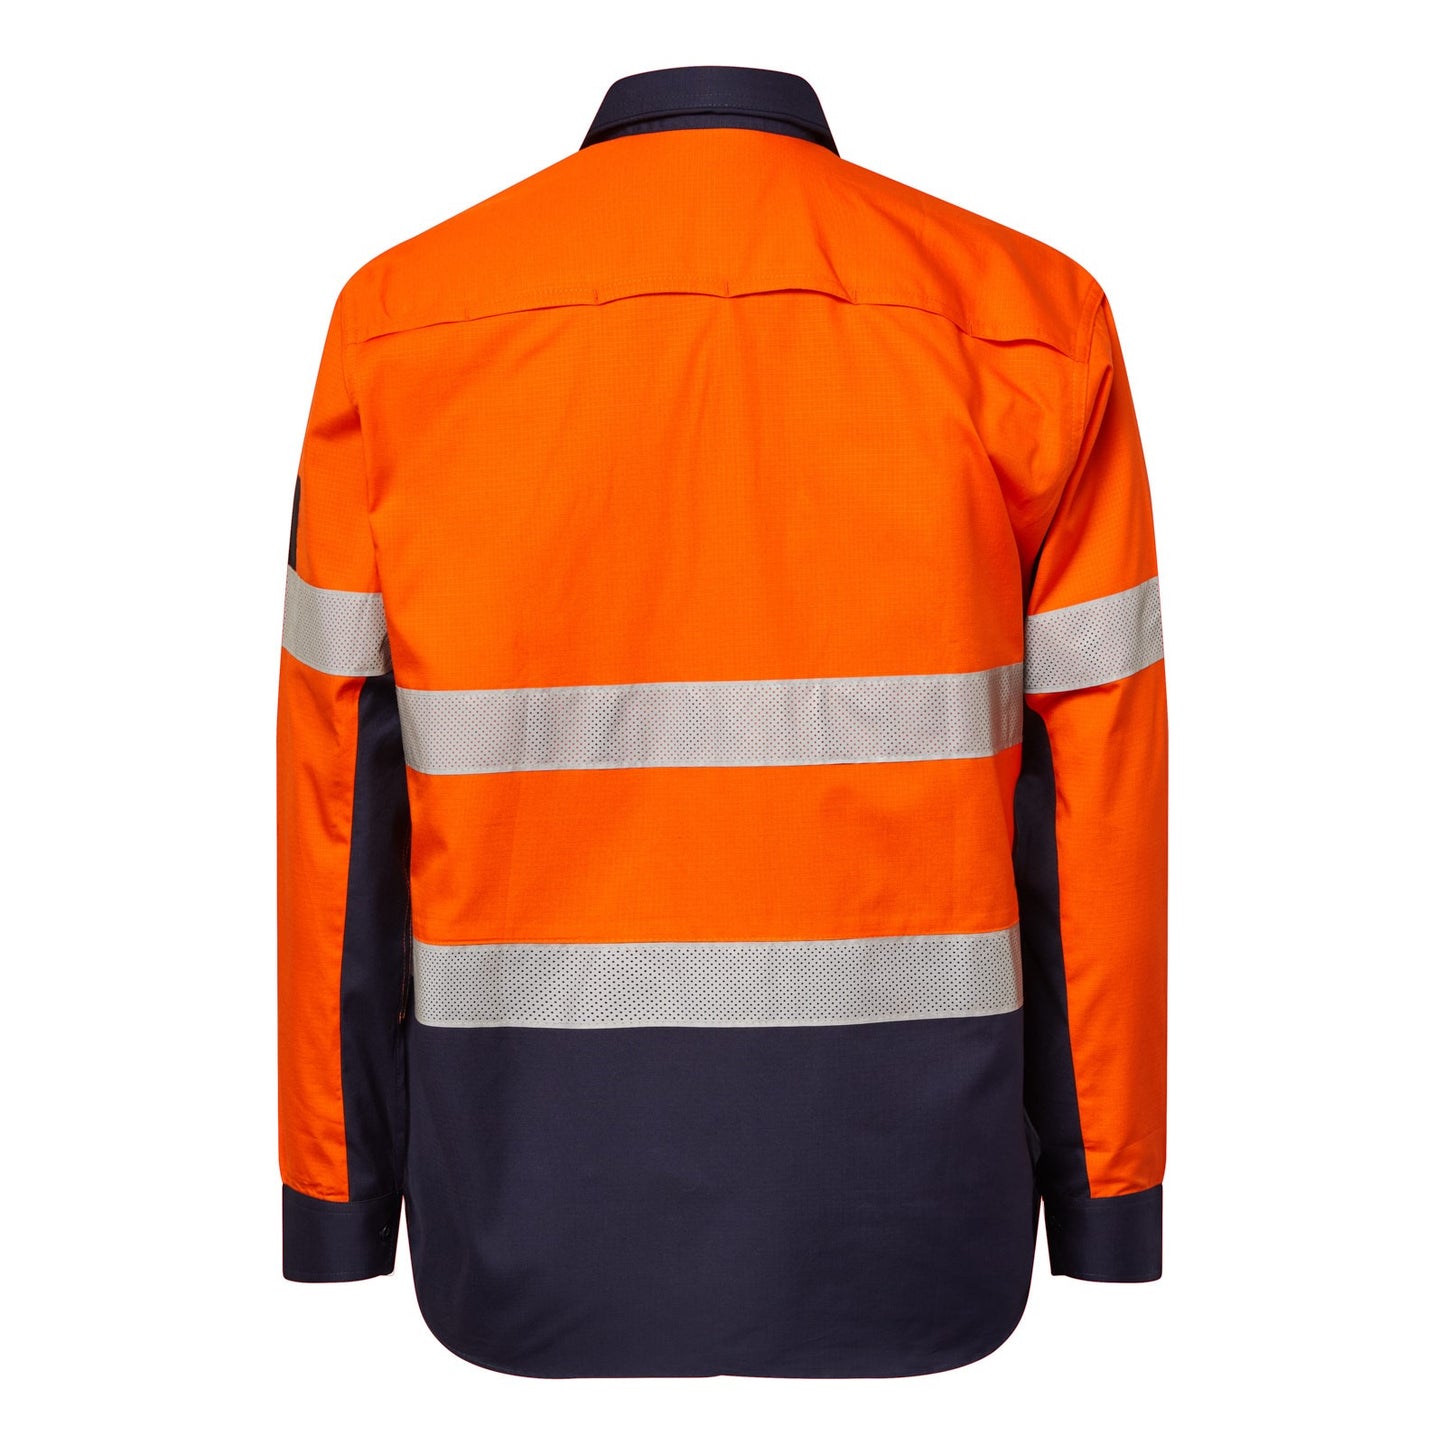 Workcraft-Ripstop L/S Vented Shirt W/Tape - WS6068